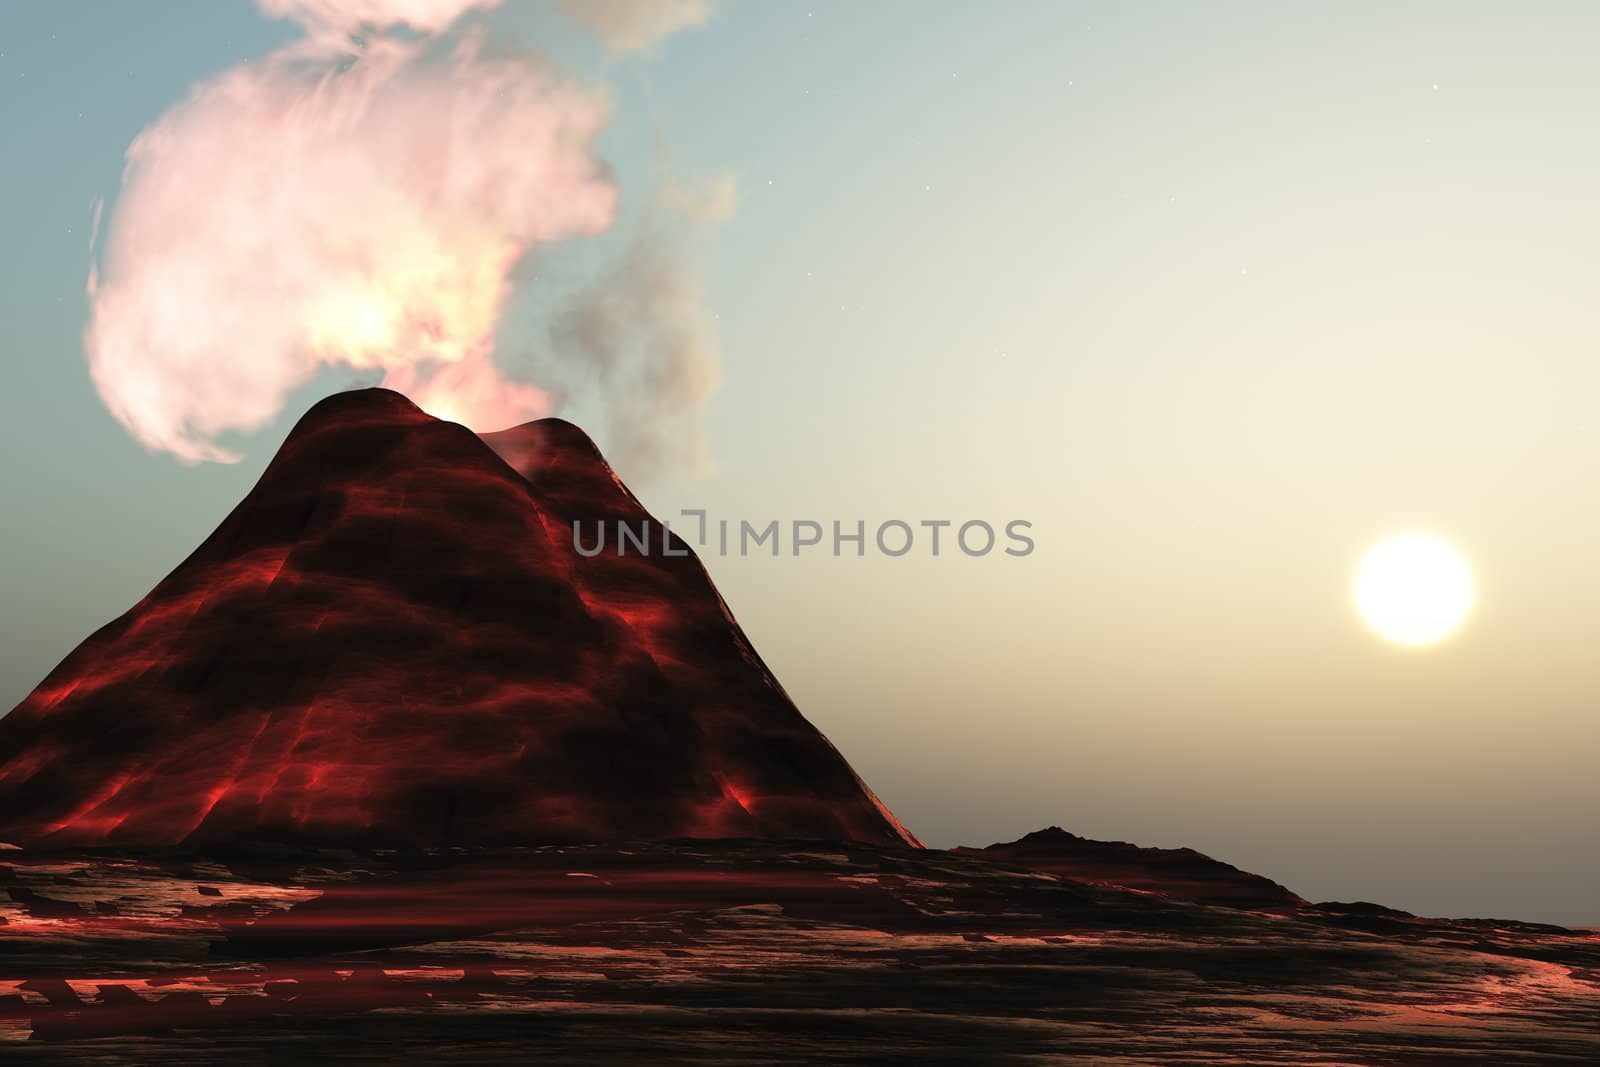 A new volcano made of molten lava expels vibrant smoke plumes.